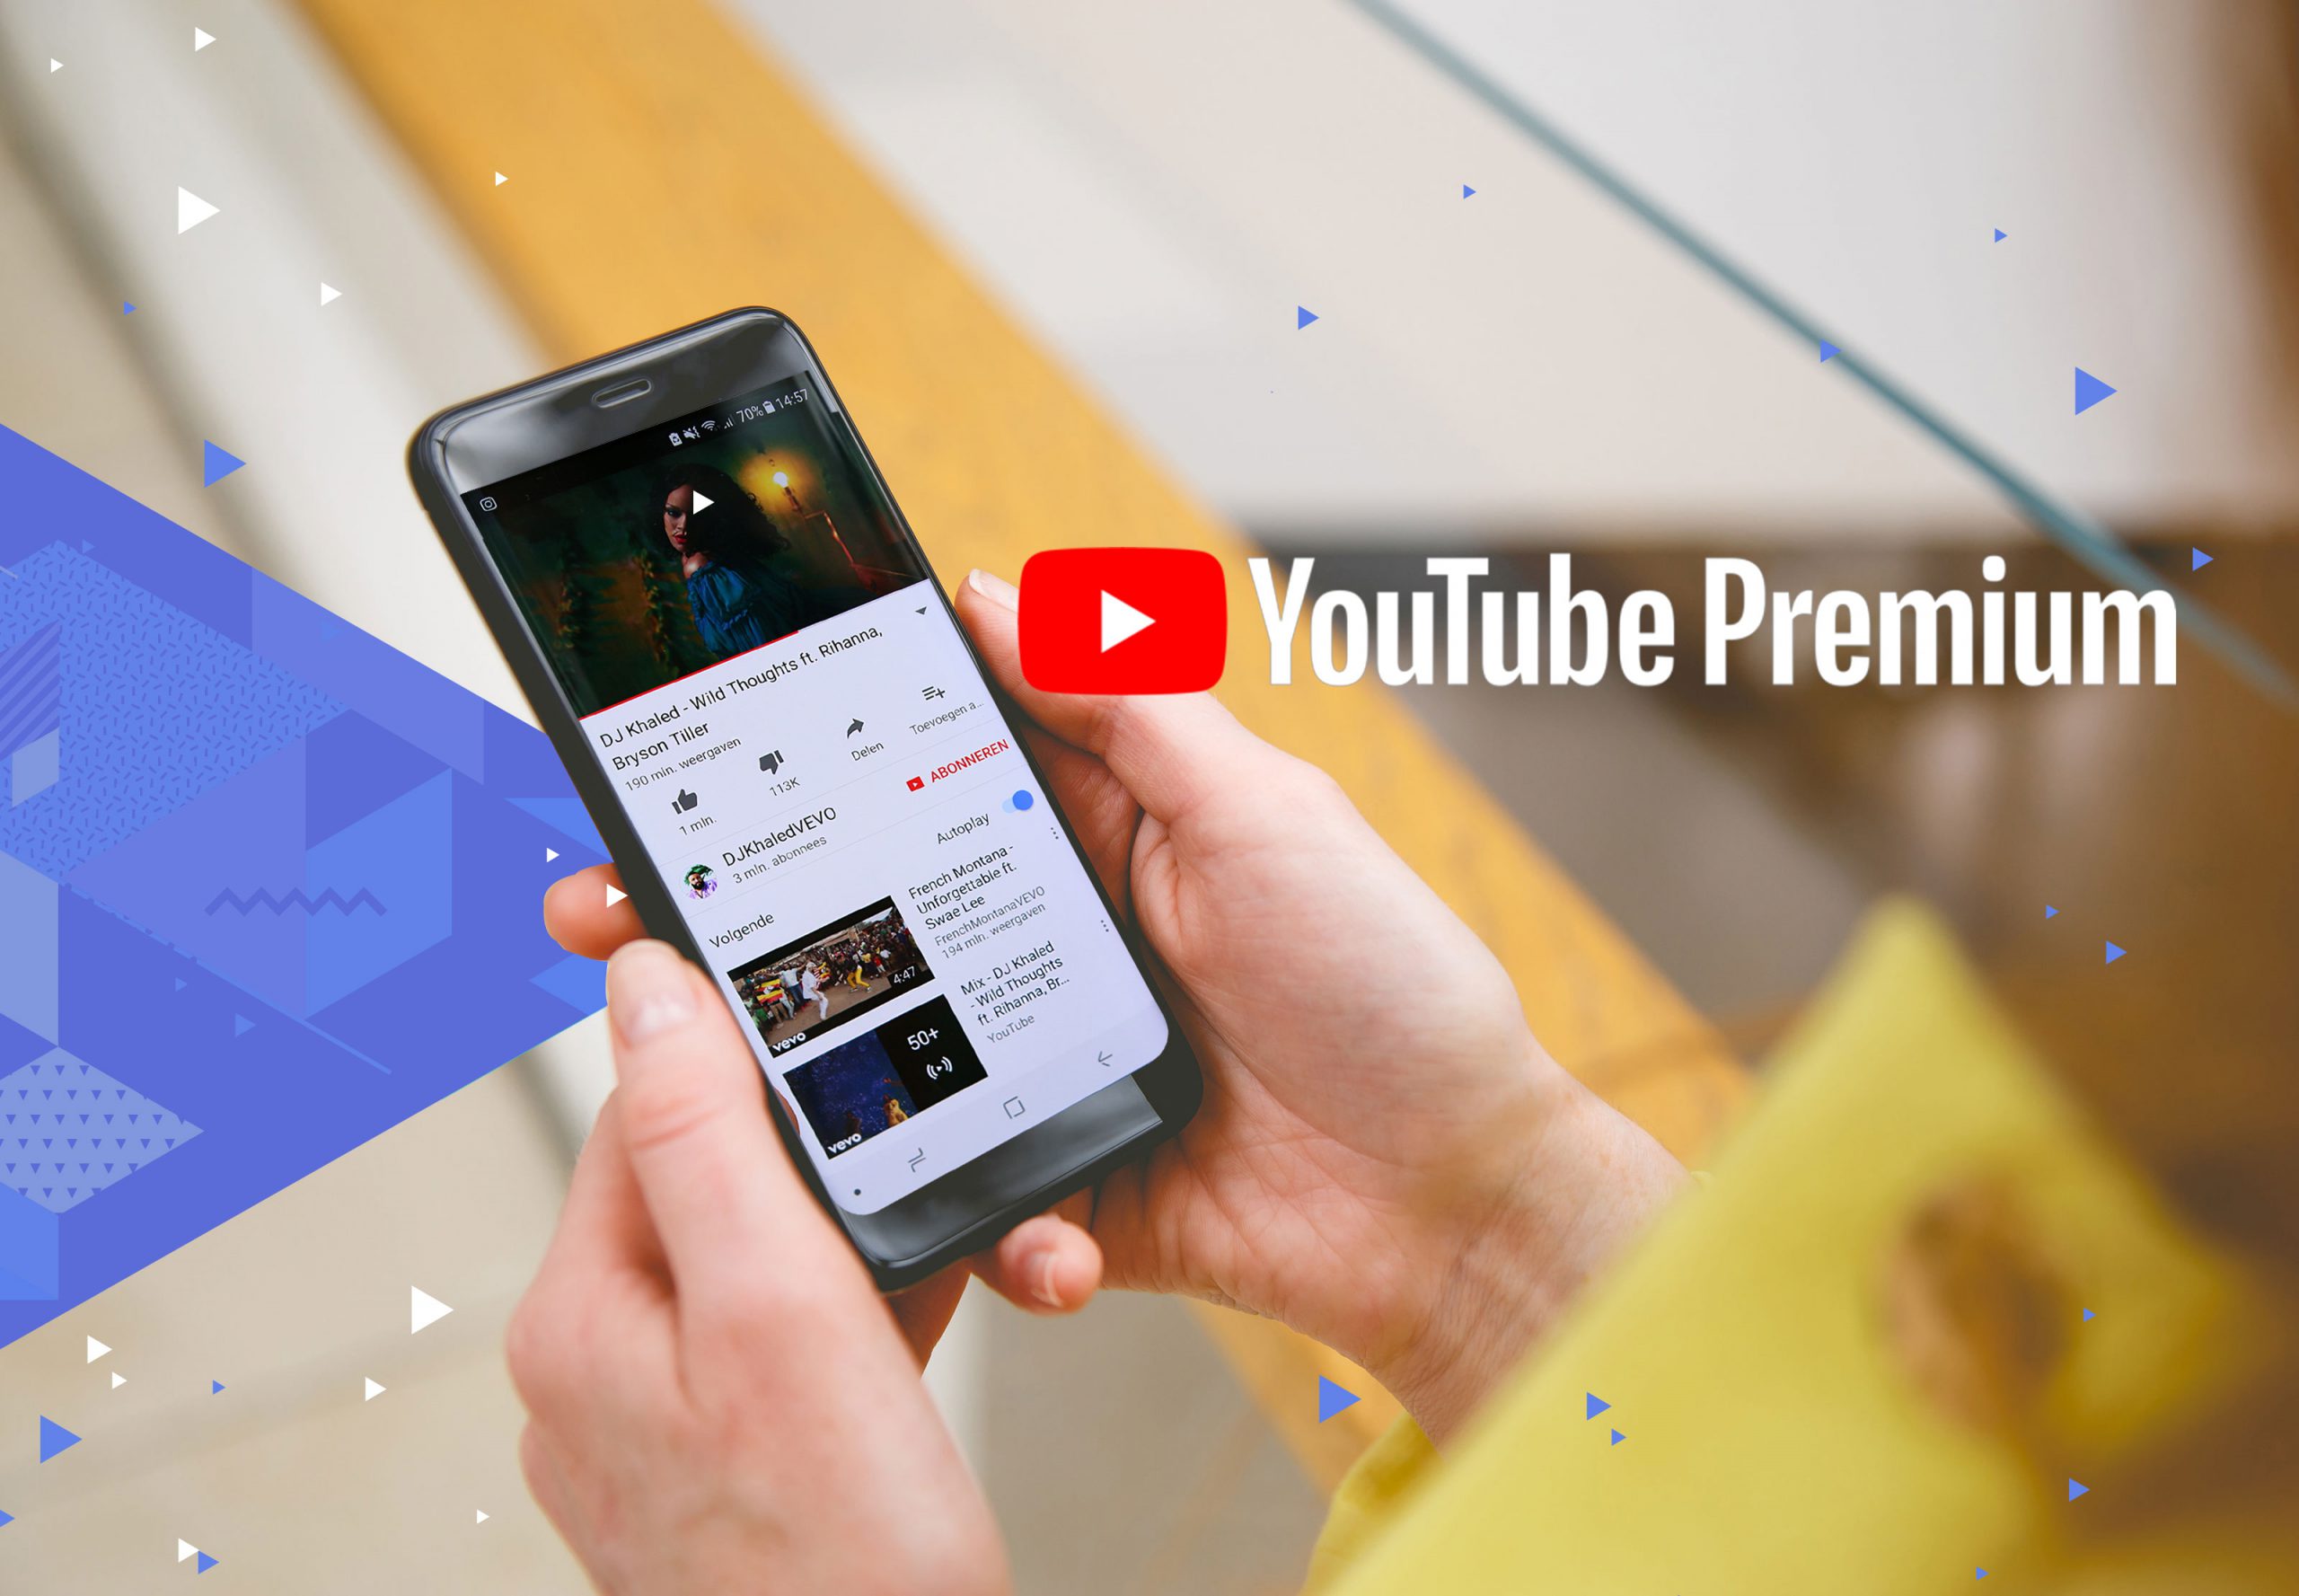 YouTube Premium Has Launched in SA! Here’s Everything You Need to Know